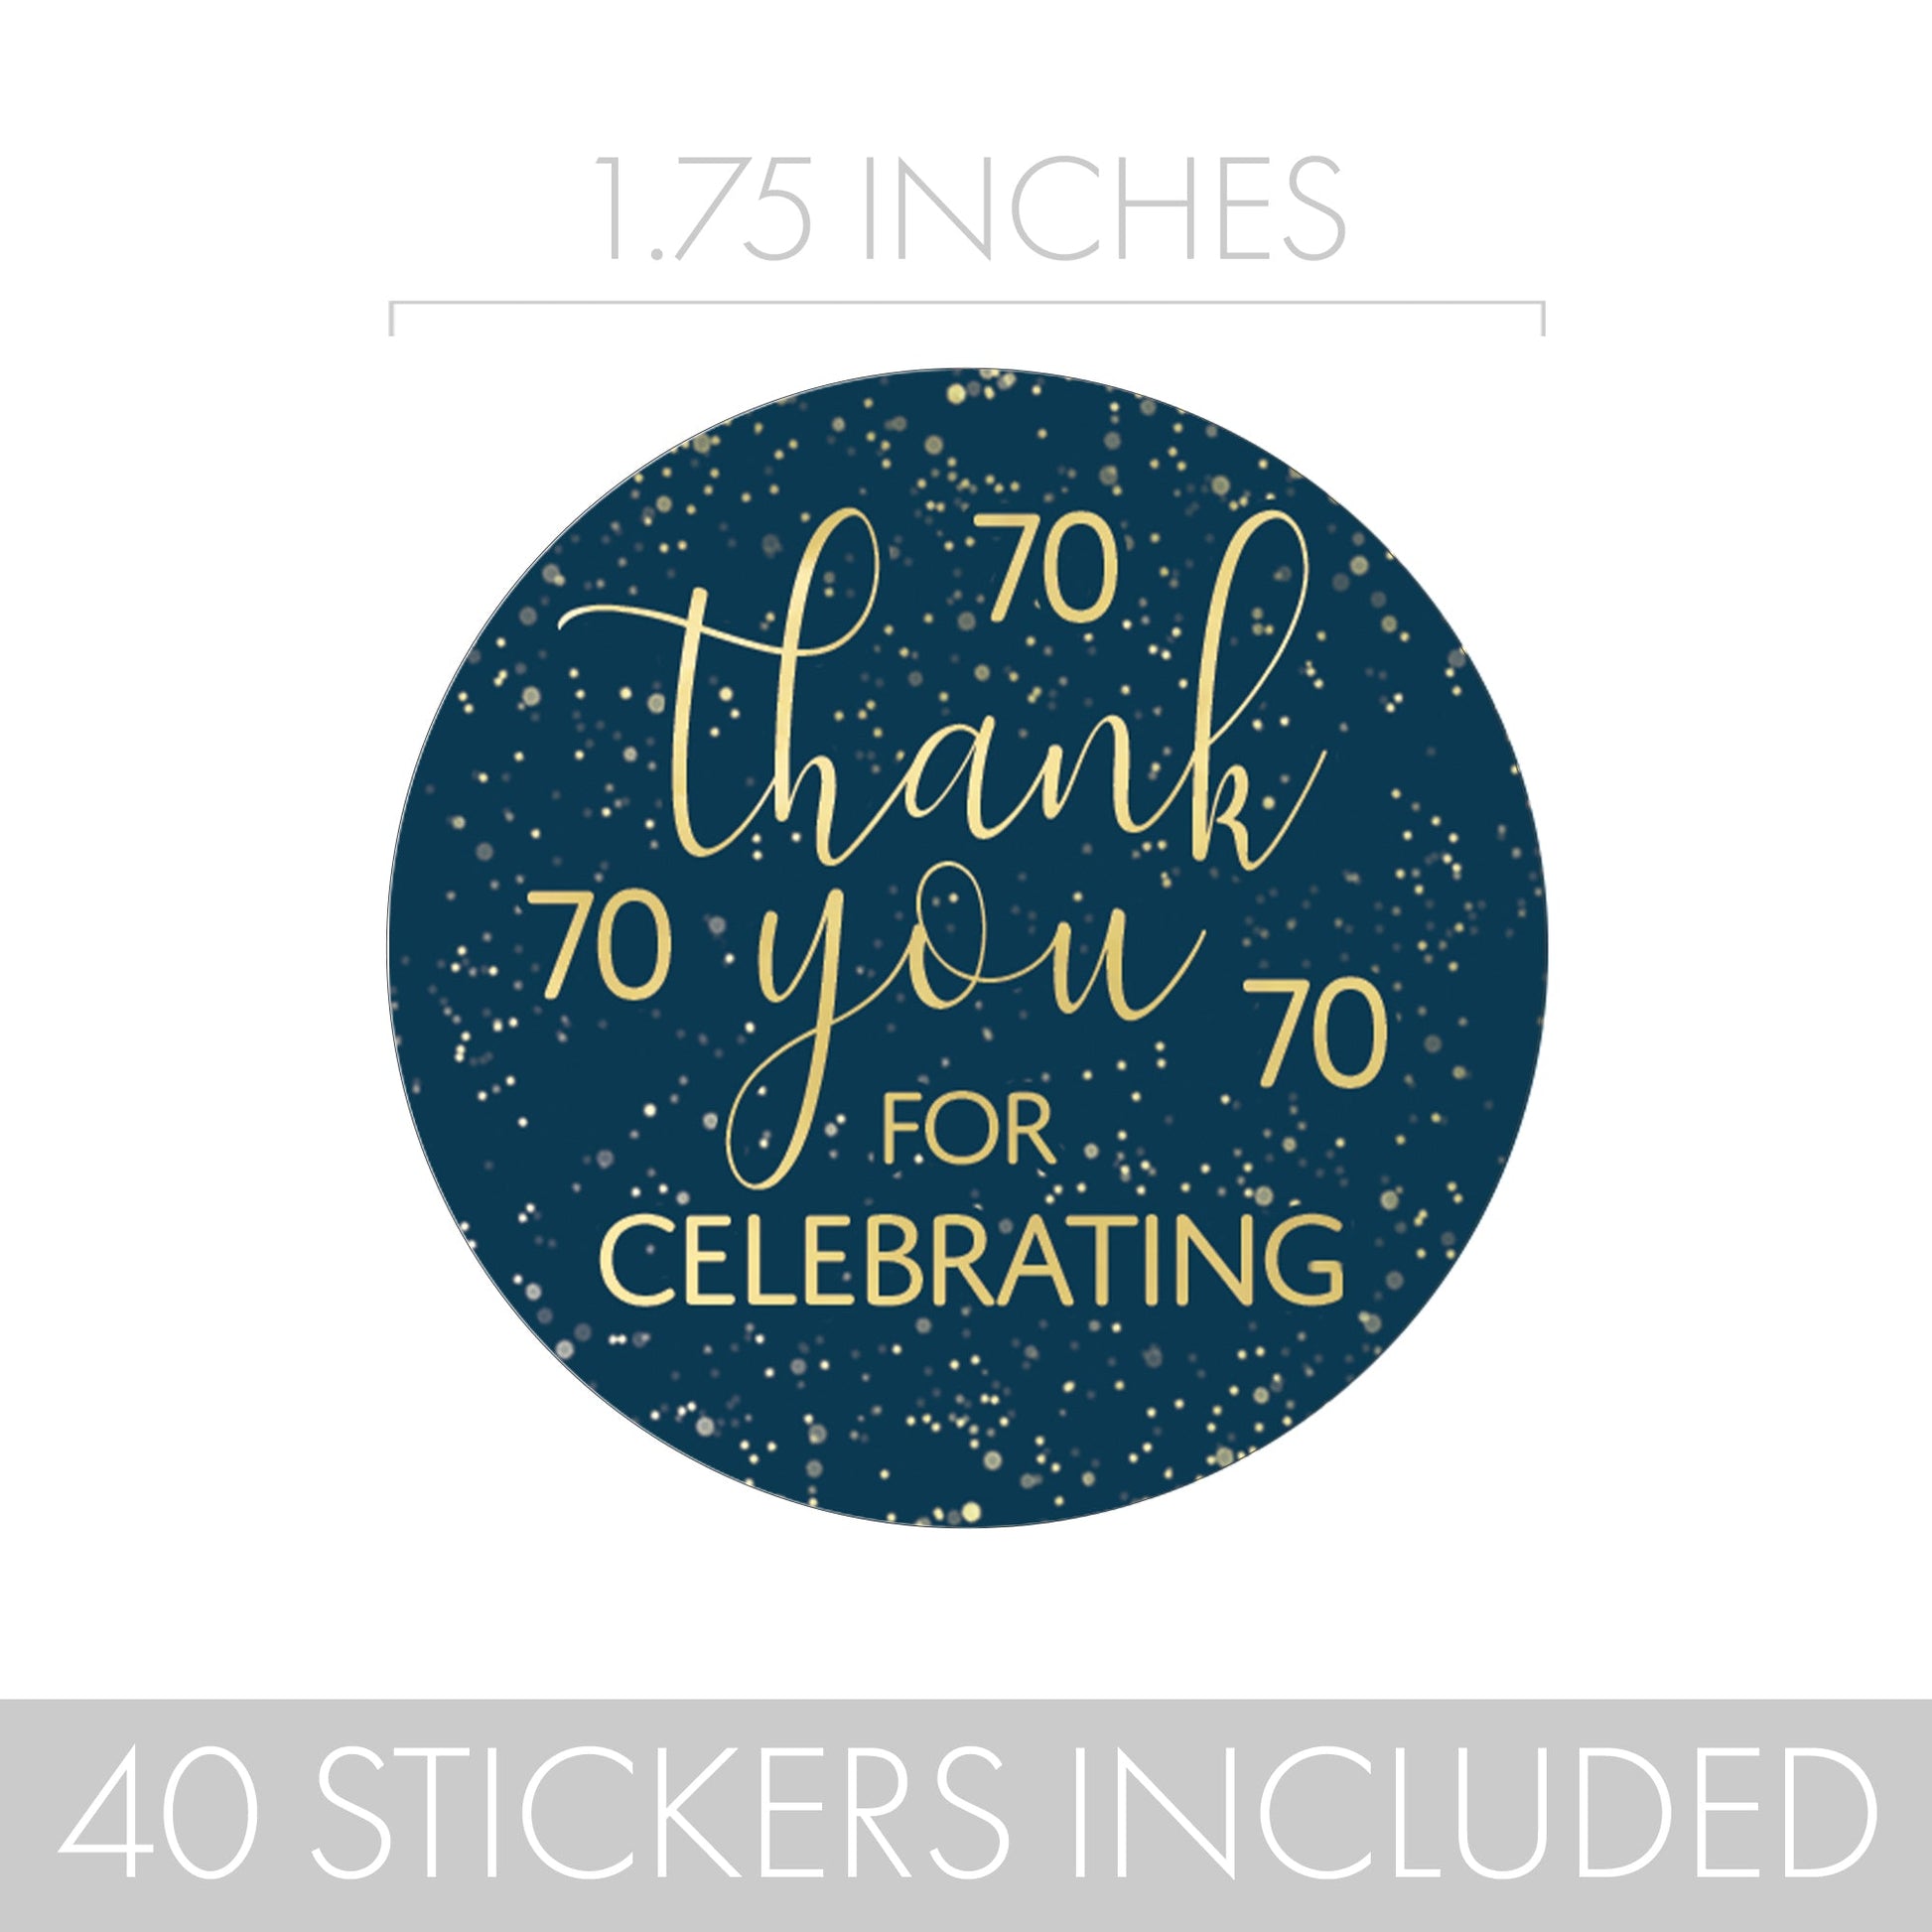 Show appreciation with Navy Blue and Gold Milestone Birthday Thank You Stickers for your 70th celebration.